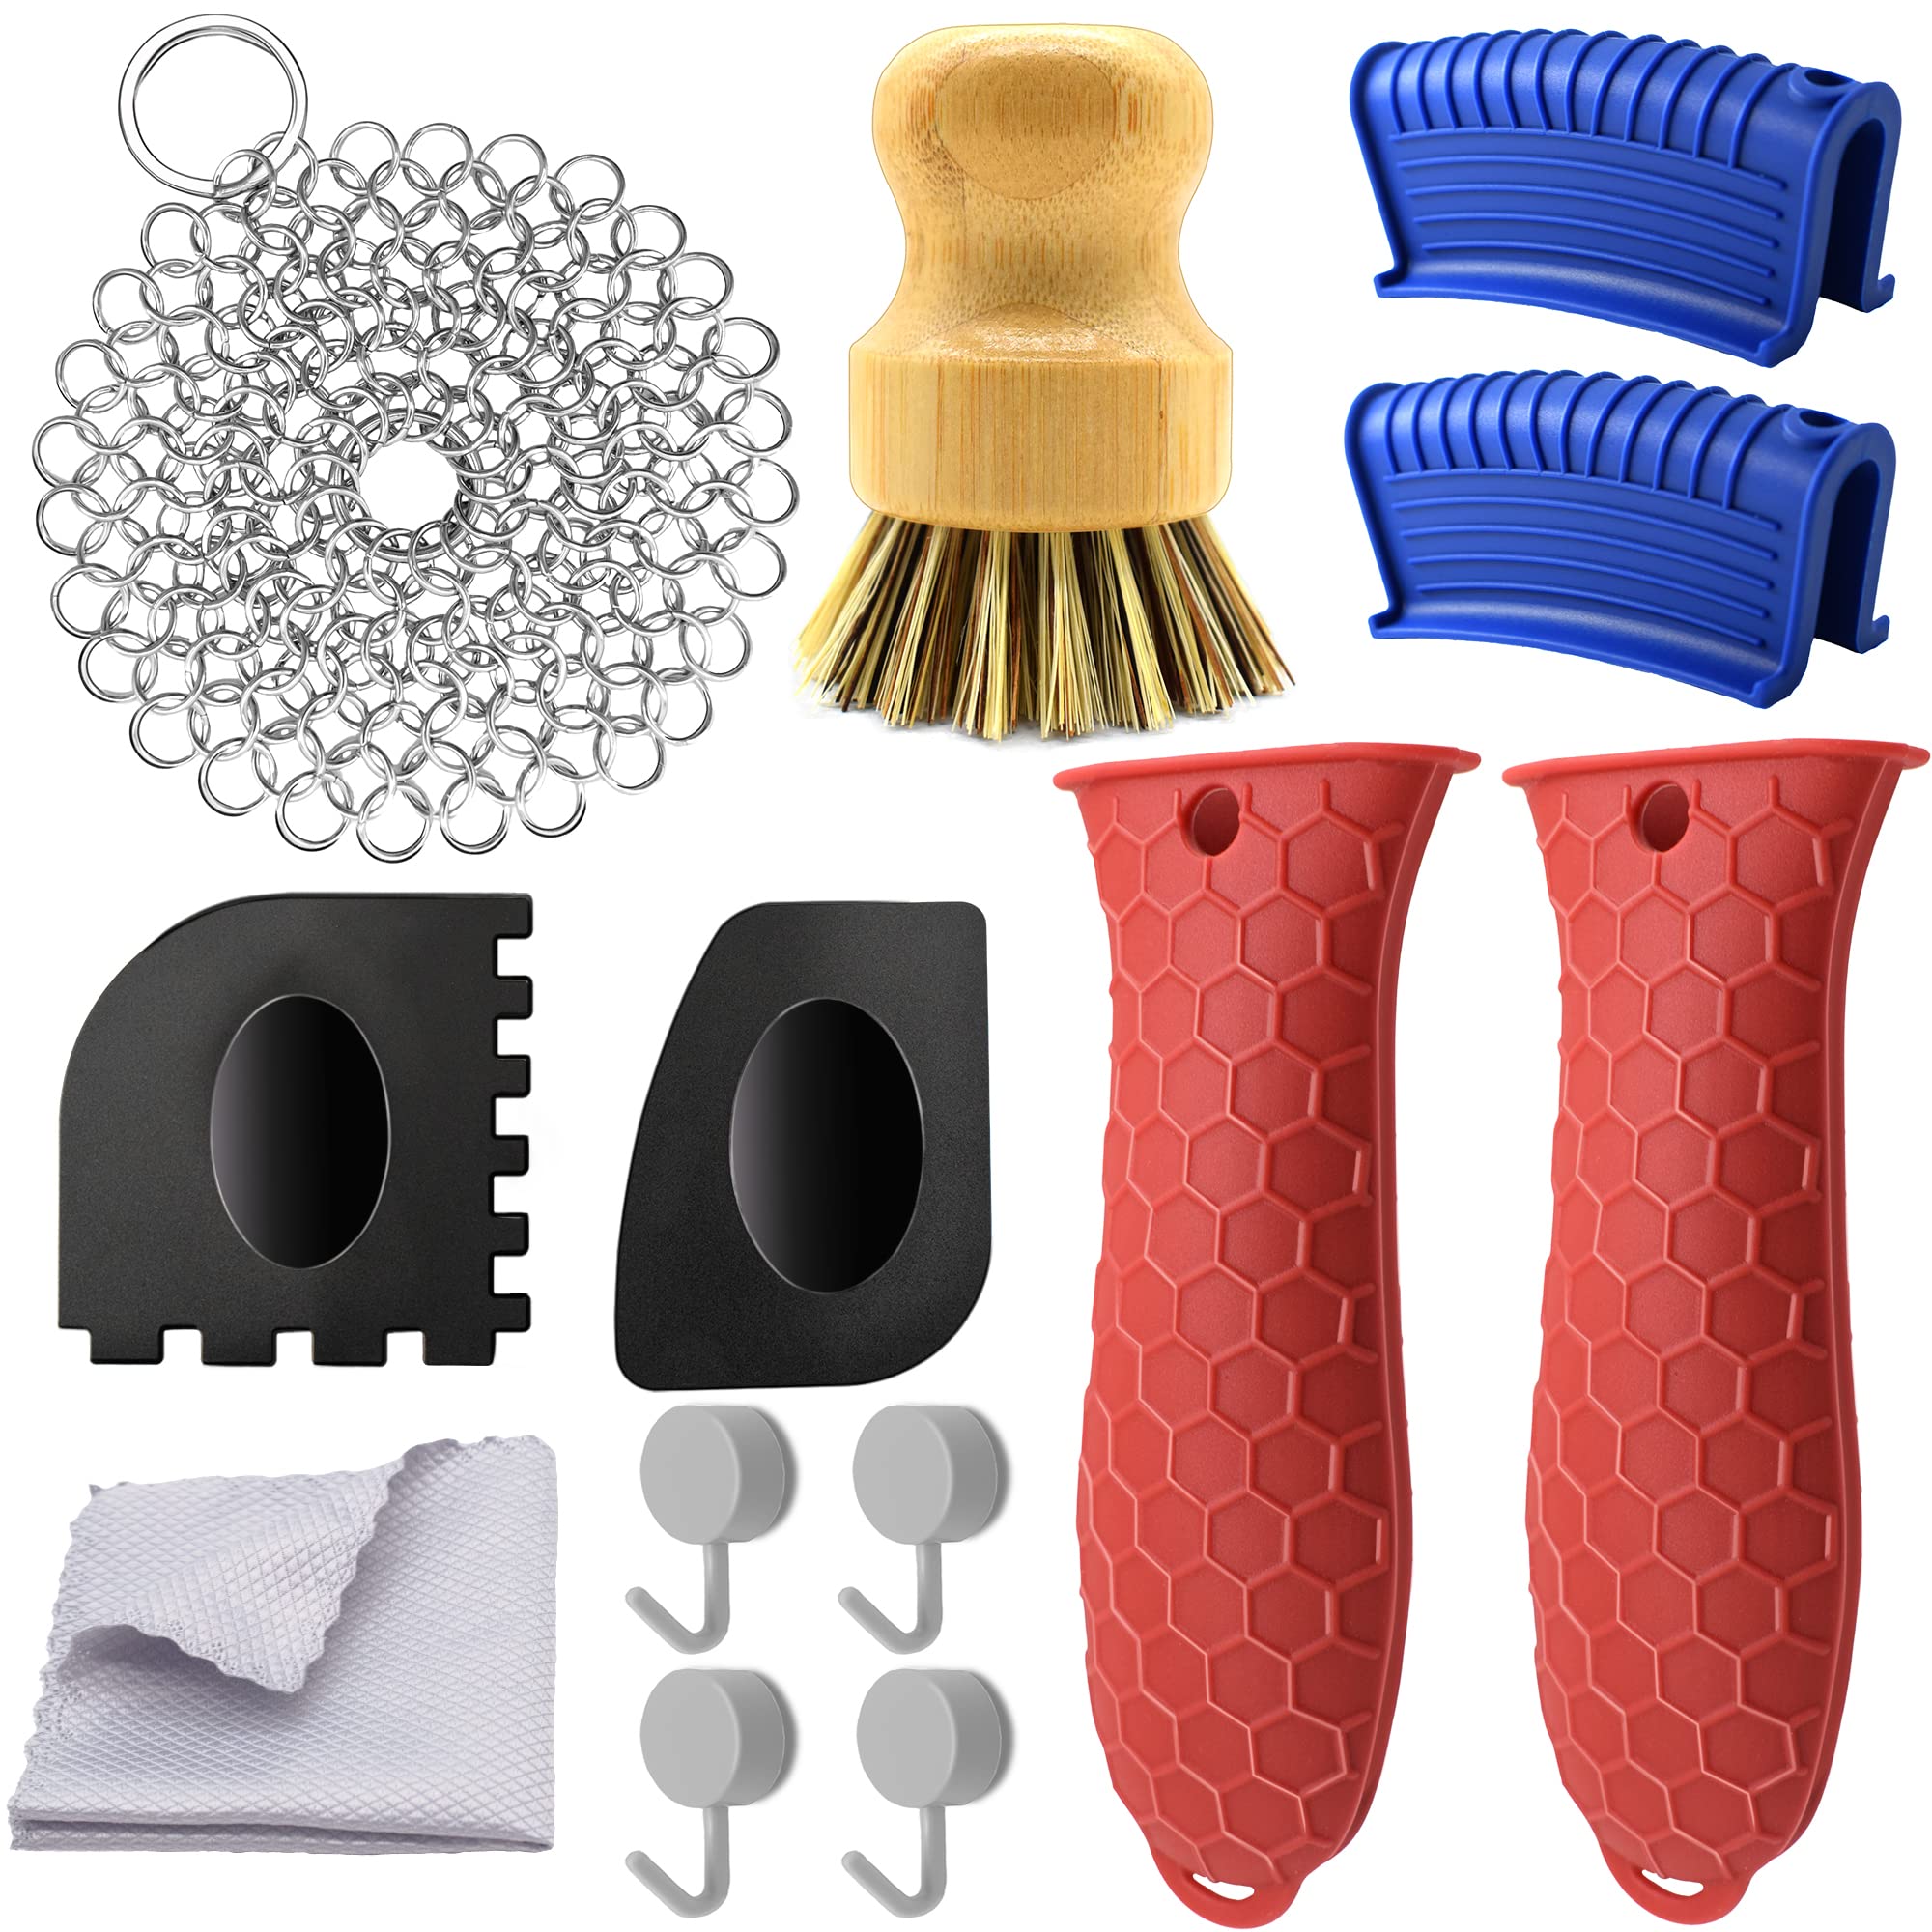 13 Pieces Hot Handle Holder Silicone Set, Cast Iron Cleaner Kit Chainmail  with Bamboo Scrub Brush, Grill Pan Scraper Tool, Heat Resistant Skillet  Assisit Handle Grips